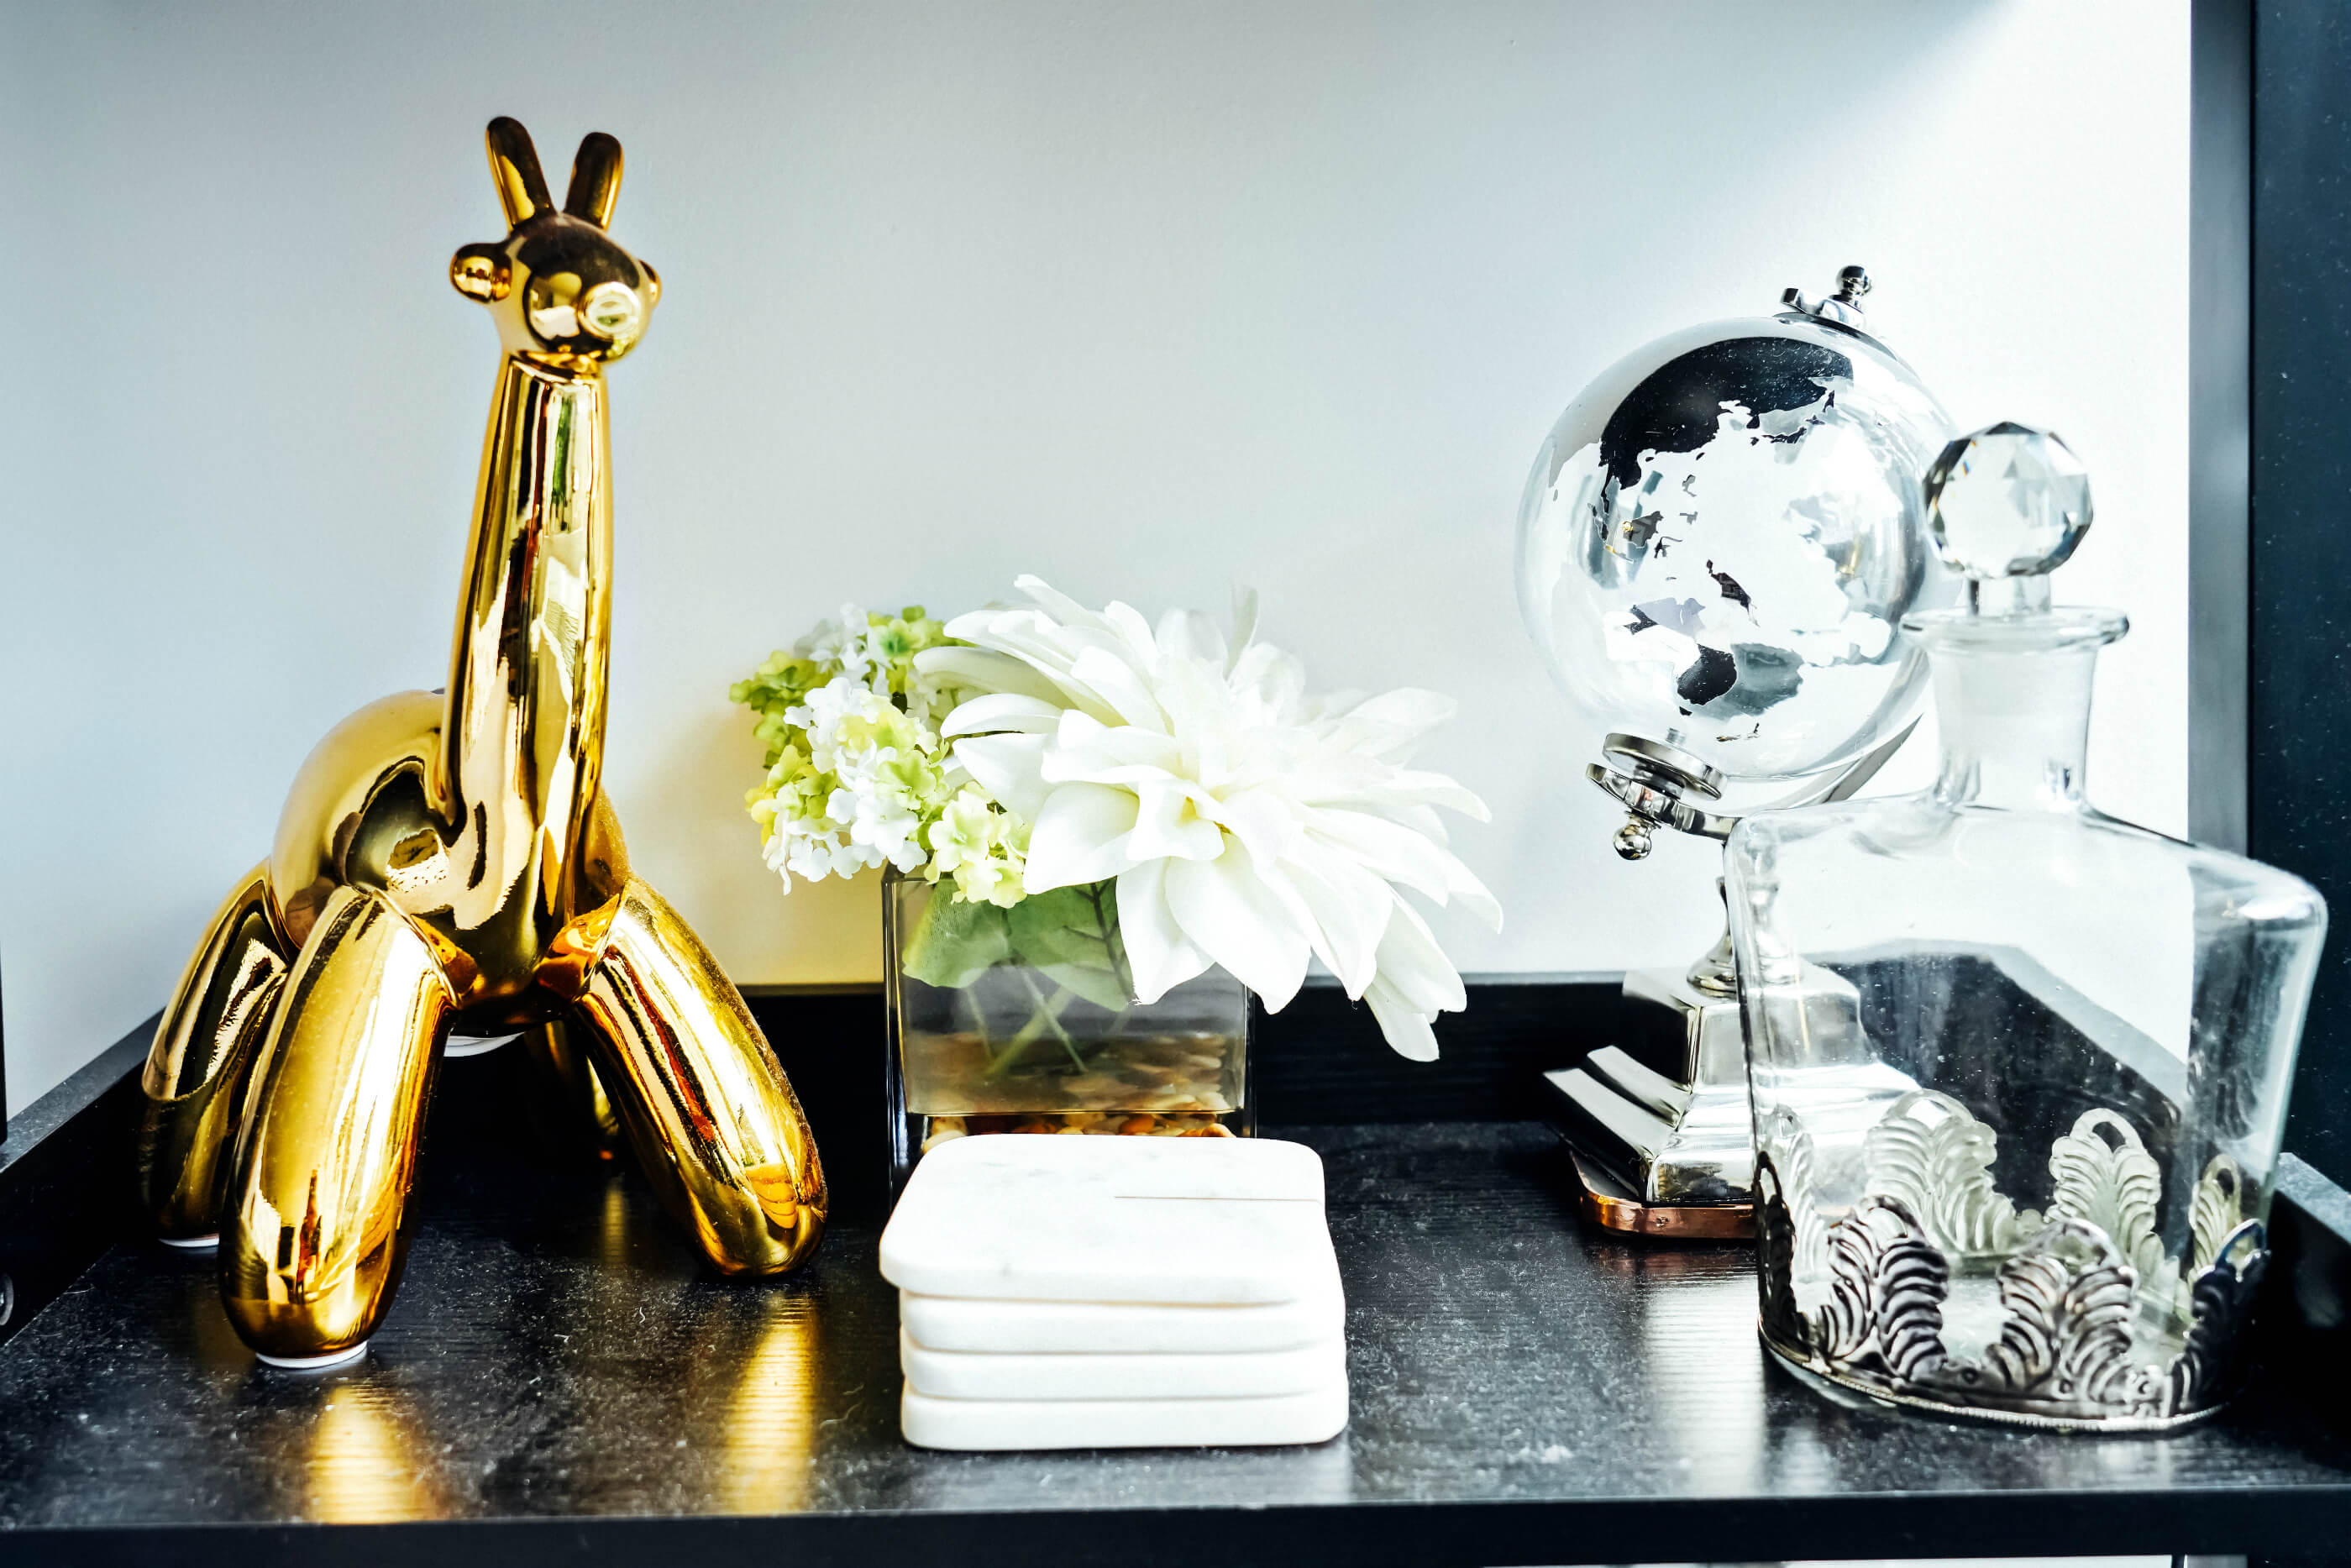 Gold Giraffe Balloon Animal Piggy Bank, Marble Coasters, Shelf Decor, New Apartment: Living Room Reveal, NYC Apartment Decor, Tilden of To Be Bright